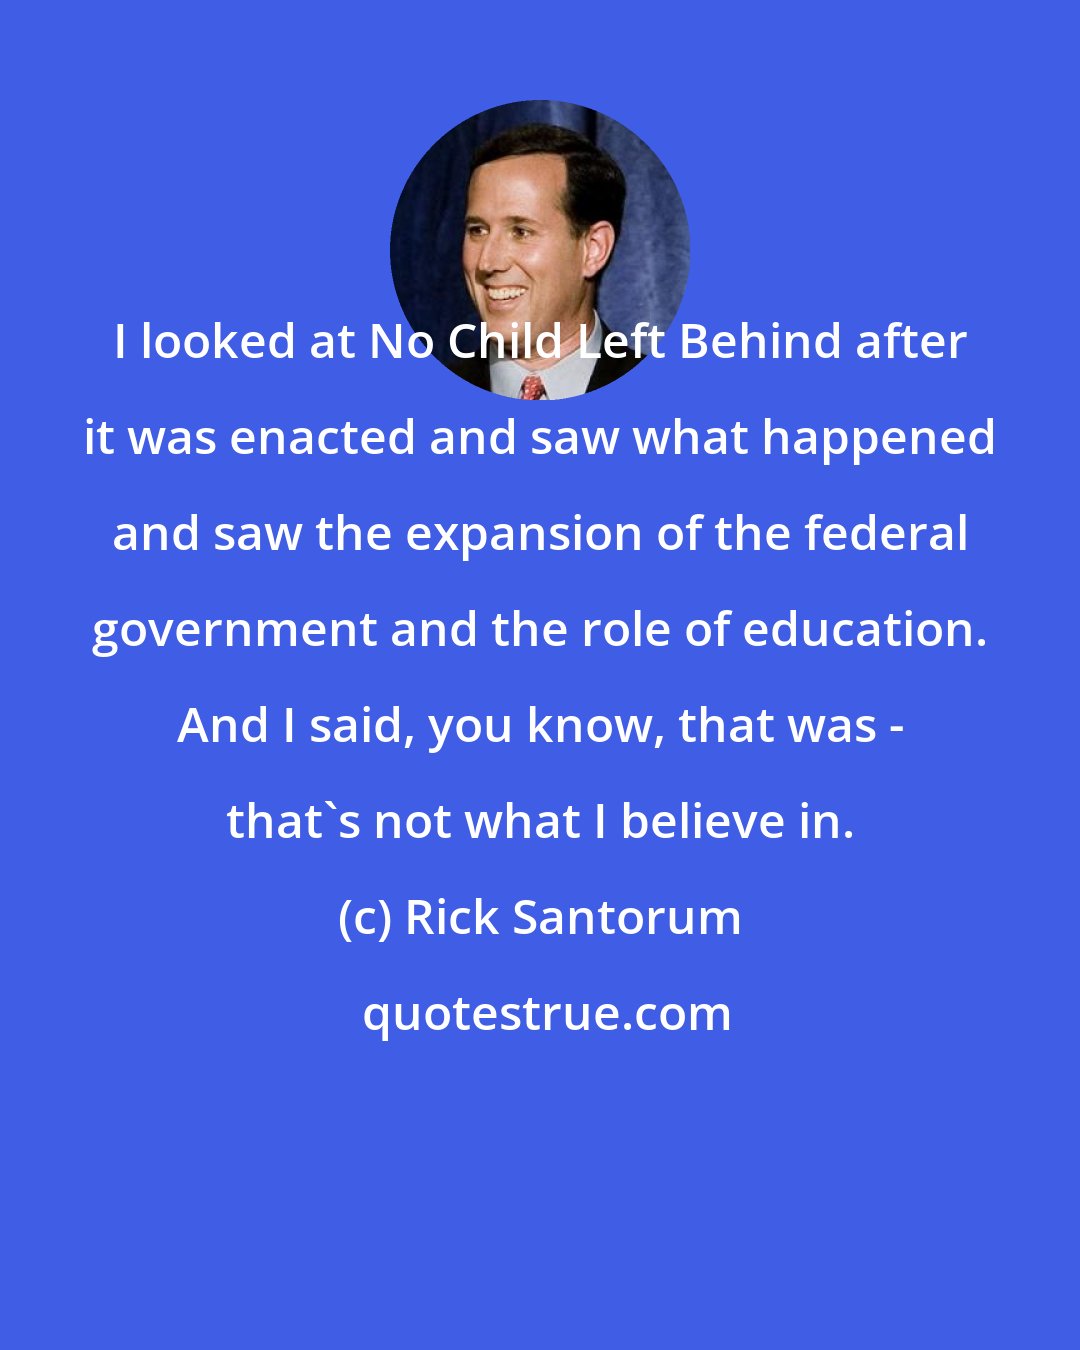 Rick Santorum: I looked at No Child Left Behind after it was enacted and saw what happened and saw the expansion of the federal government and the role of education. And I said, you know, that was - that's not what I believe in.